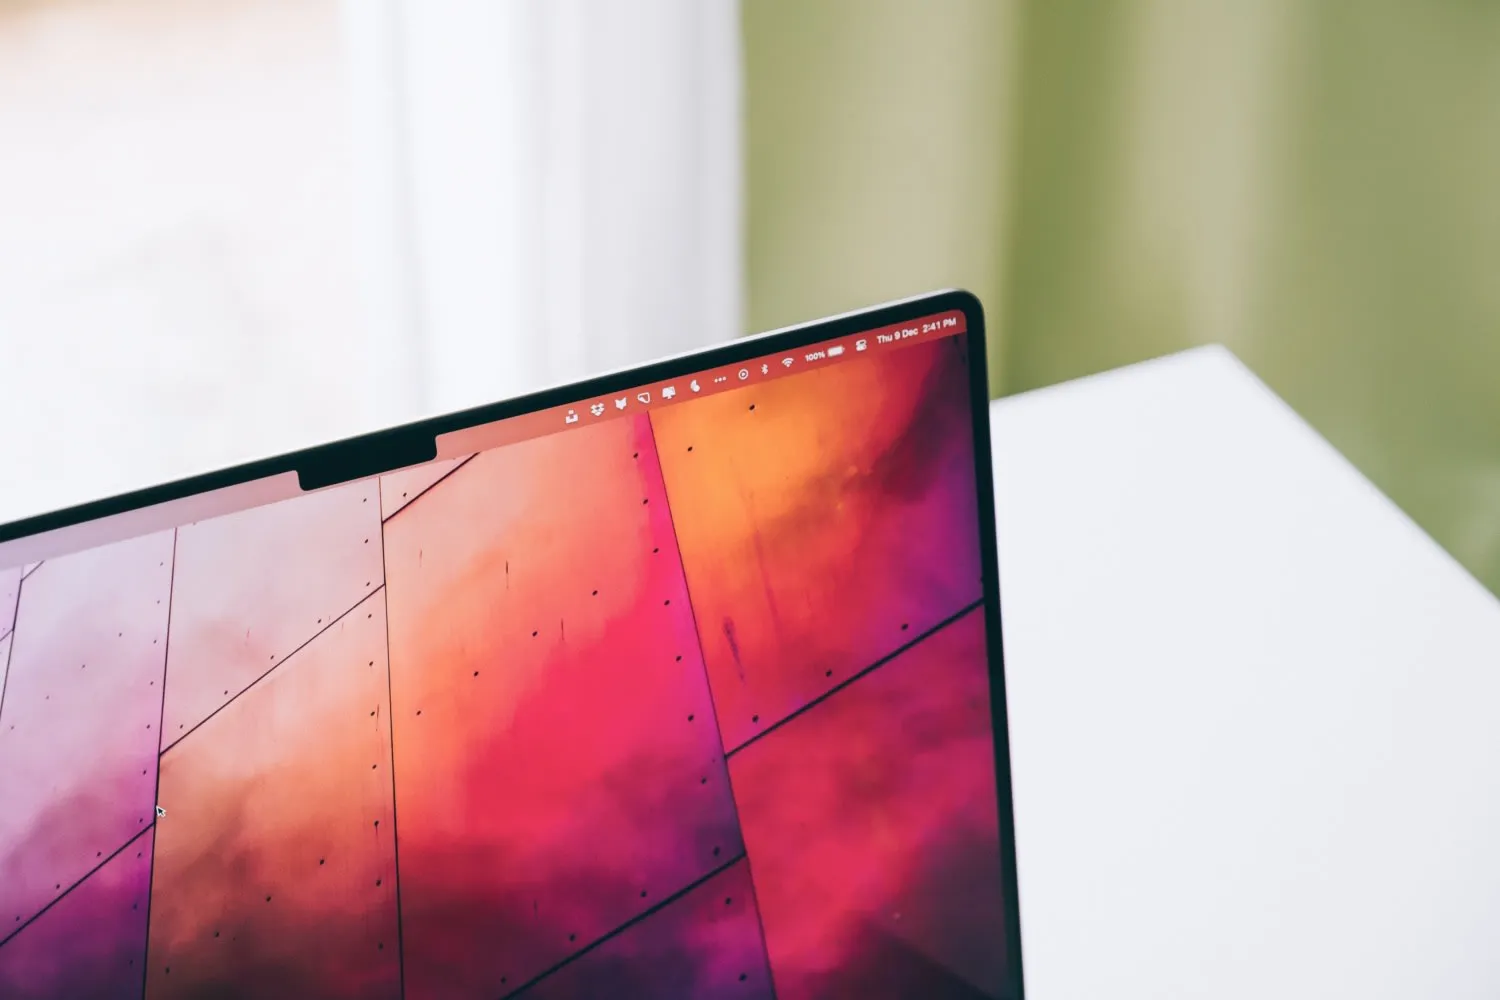 MacBook Pro 16-inch display focussed on the notch